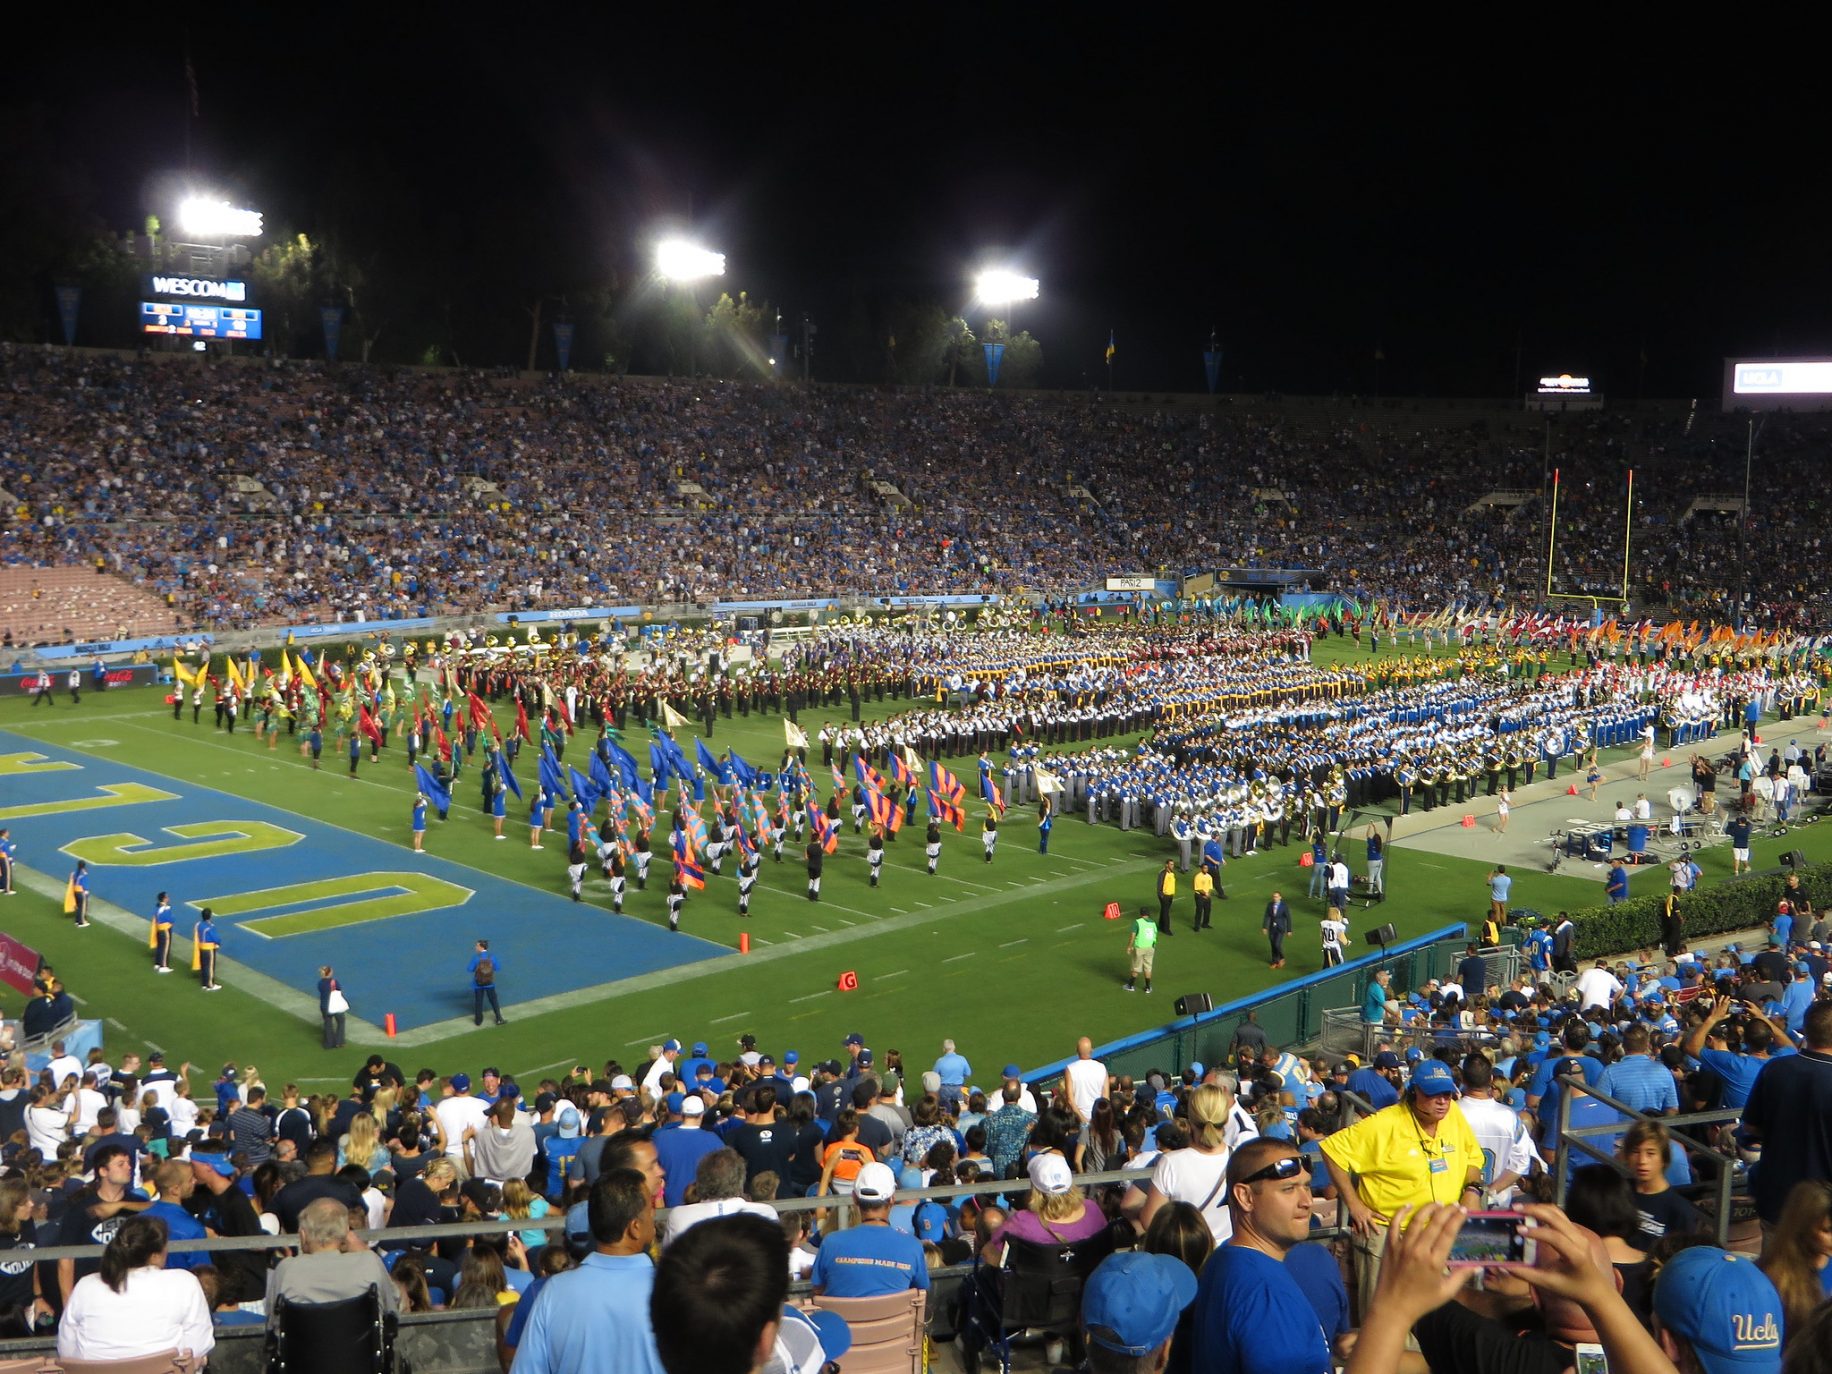 High School Marching Bands Perform During Halftime At The Rose Bowl. Photo Credit: Ken Lund | Under Creative Commons License